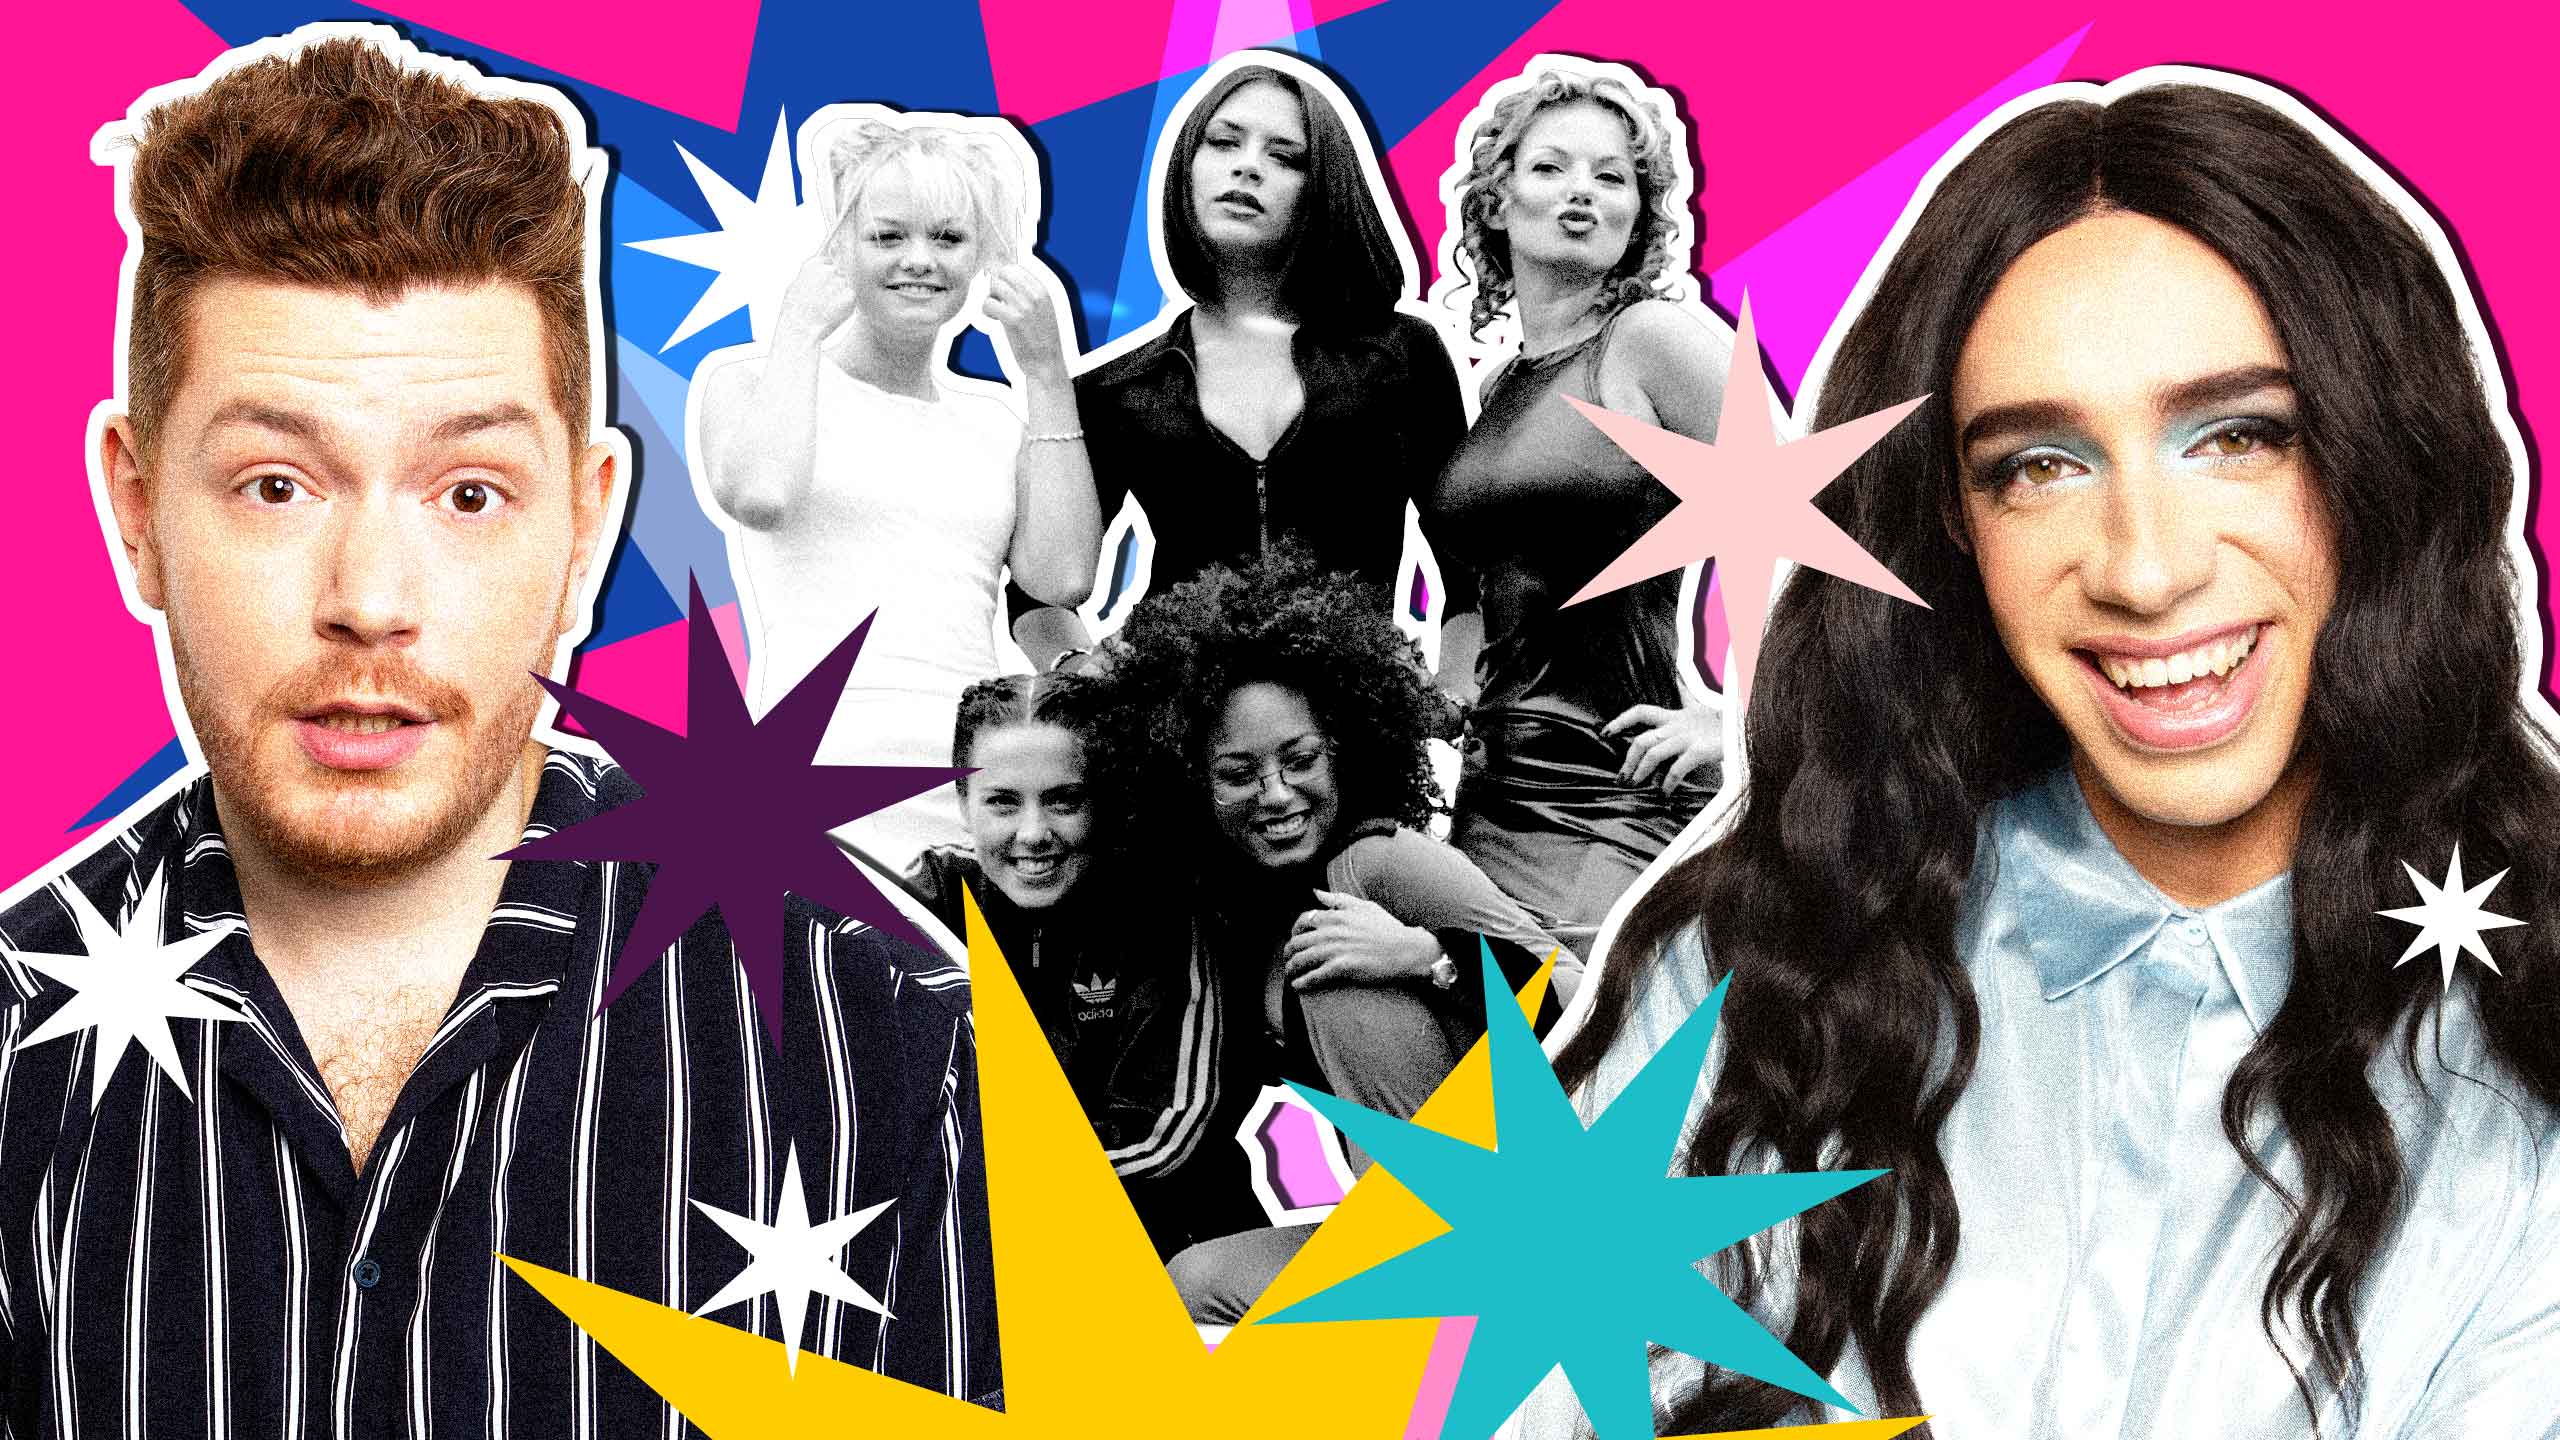 If the Spice Girls were so disposable, why are we still humming